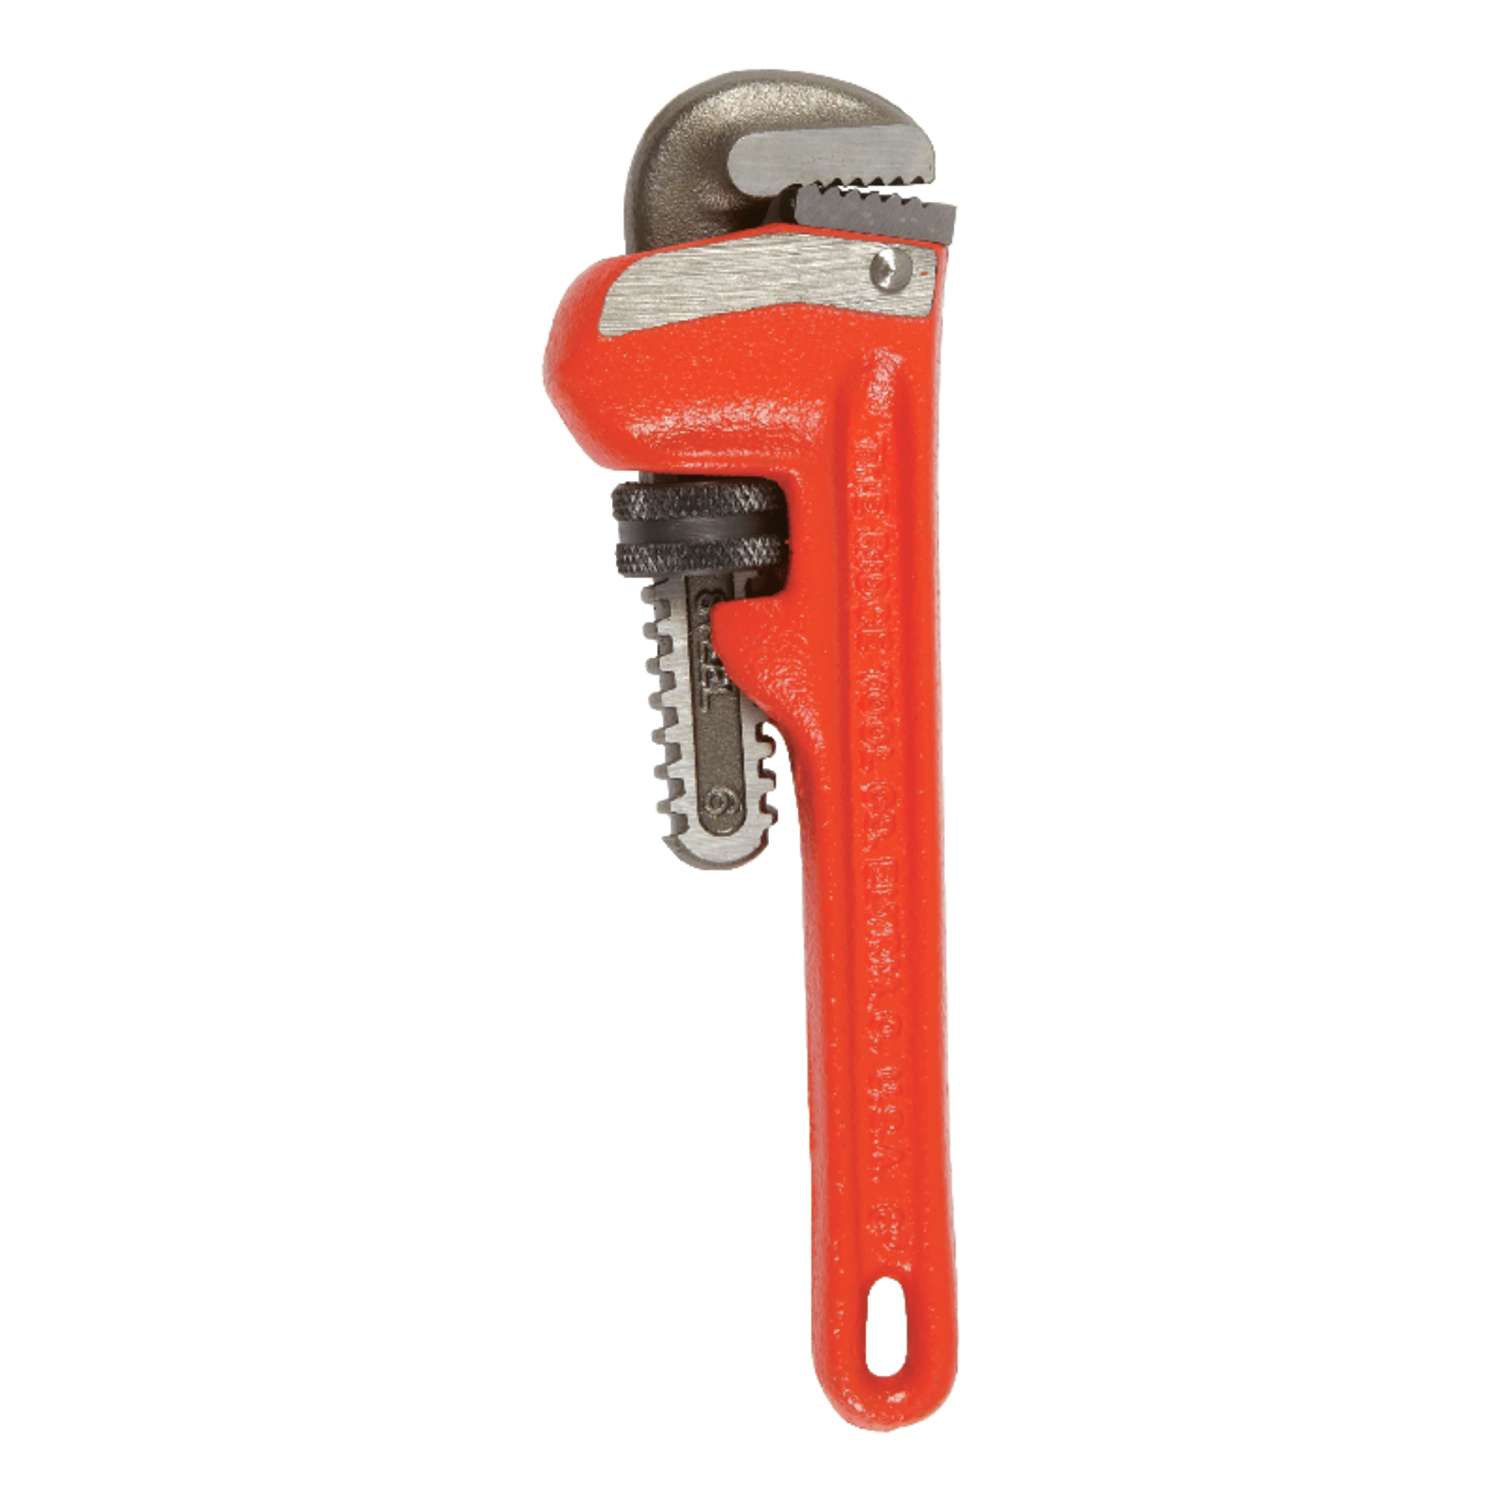 RIDGID Pipe Wrenches 45540 Hook Top 1452 for sale online 